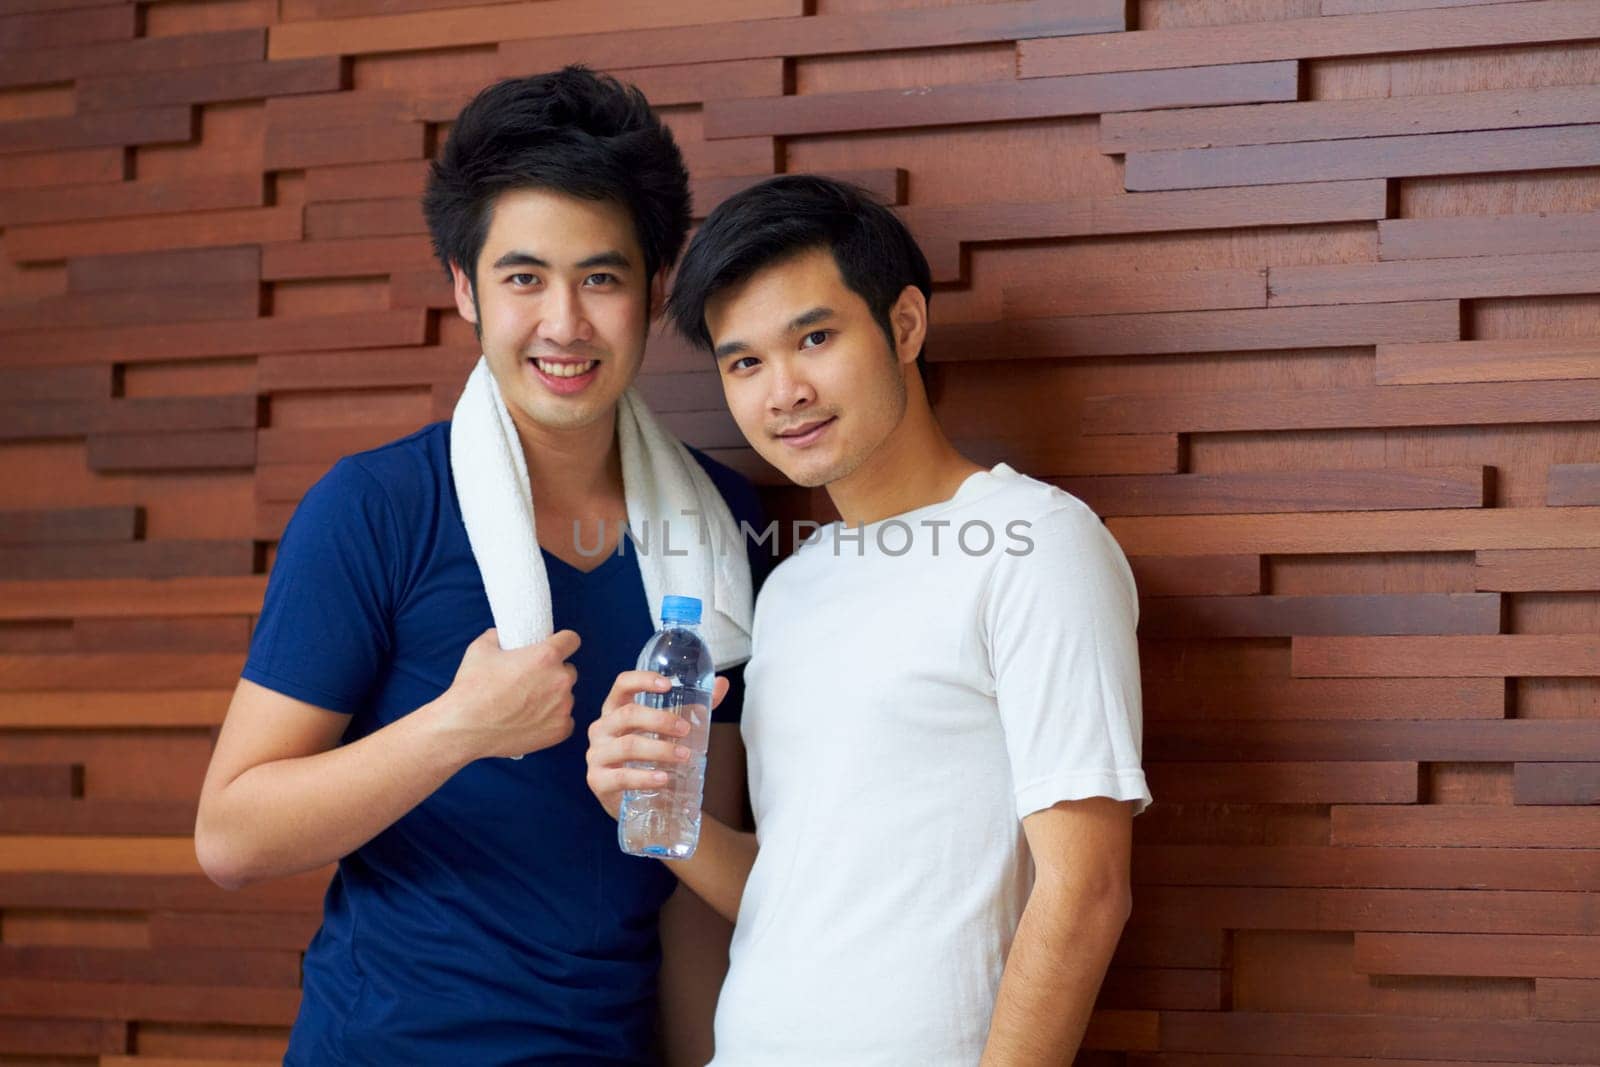 Happy, portrait and gay couple at the gym with water on a break from a workout together. Smile, wellness and Asian lgbt men training at a club for exercise, health and happiness with fitness.